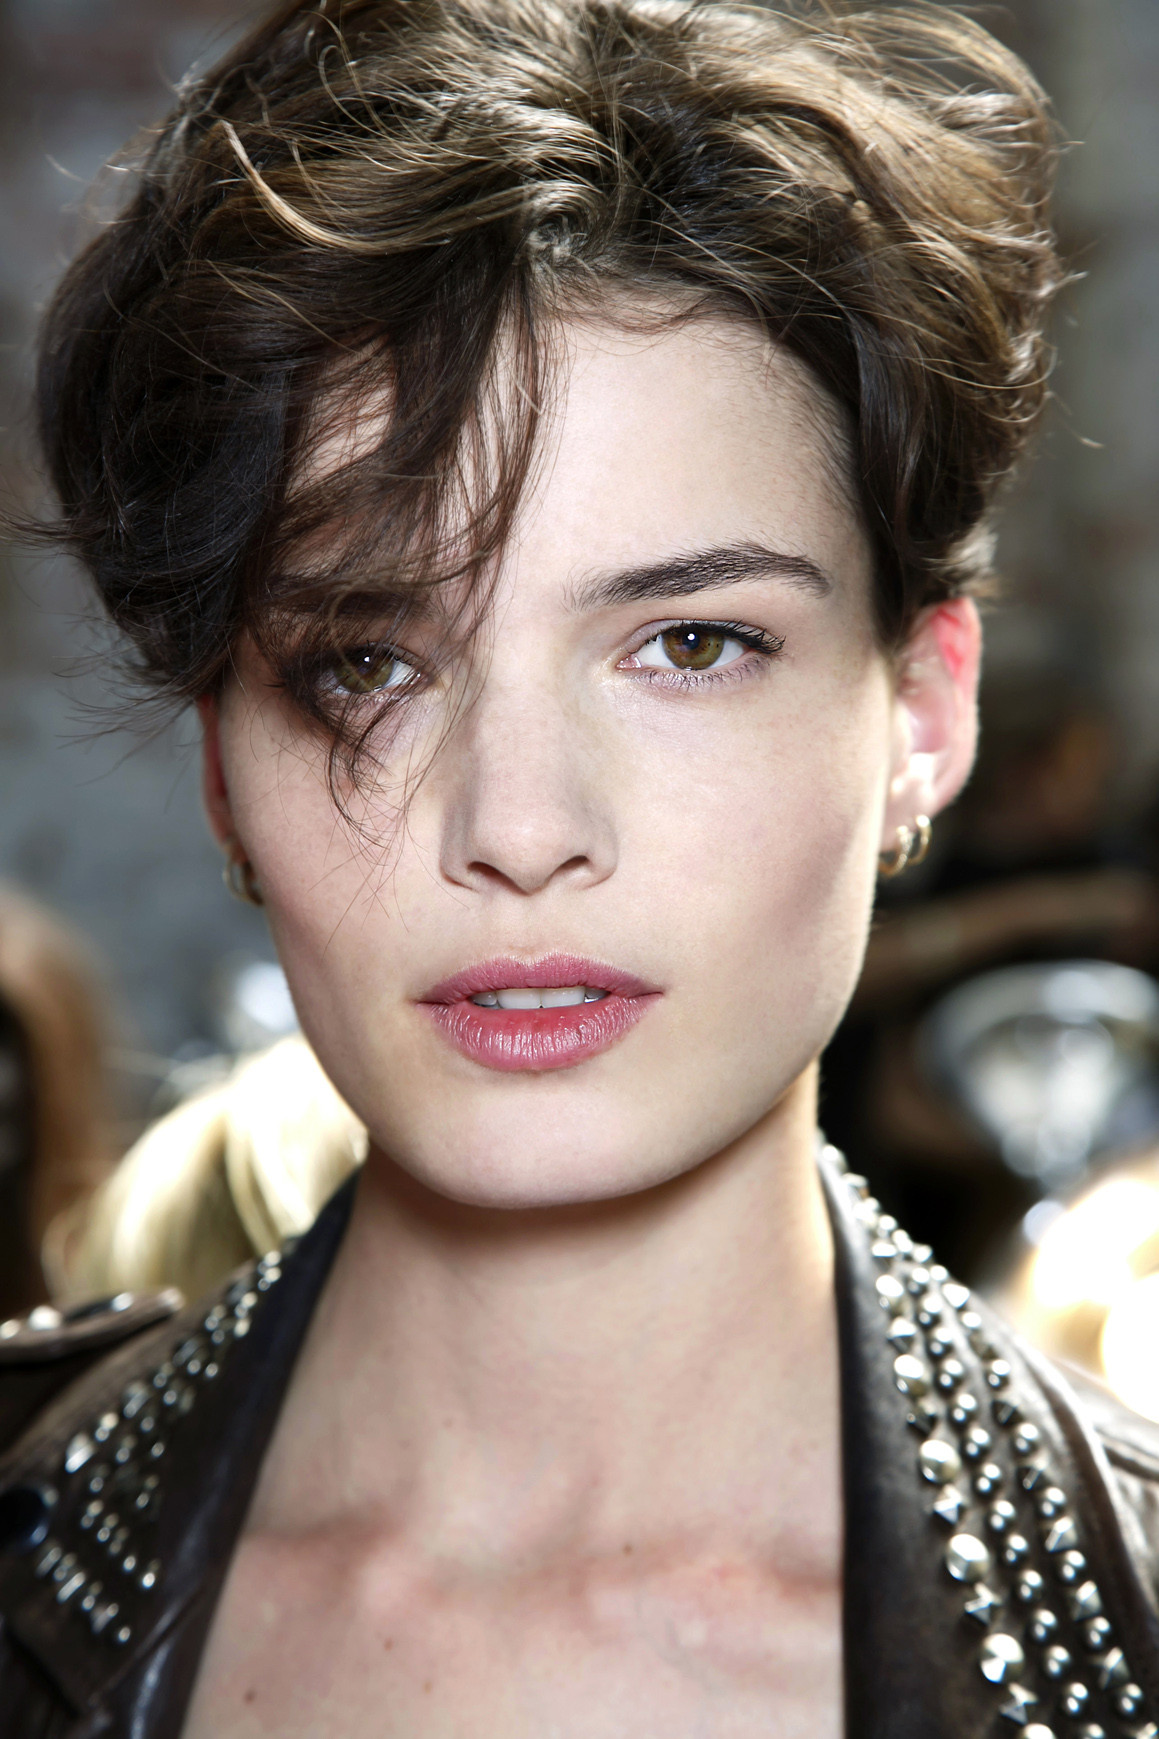 How To Cut Short Hair
 Short Hair 8 Things to Know Before You Cut Your Hair